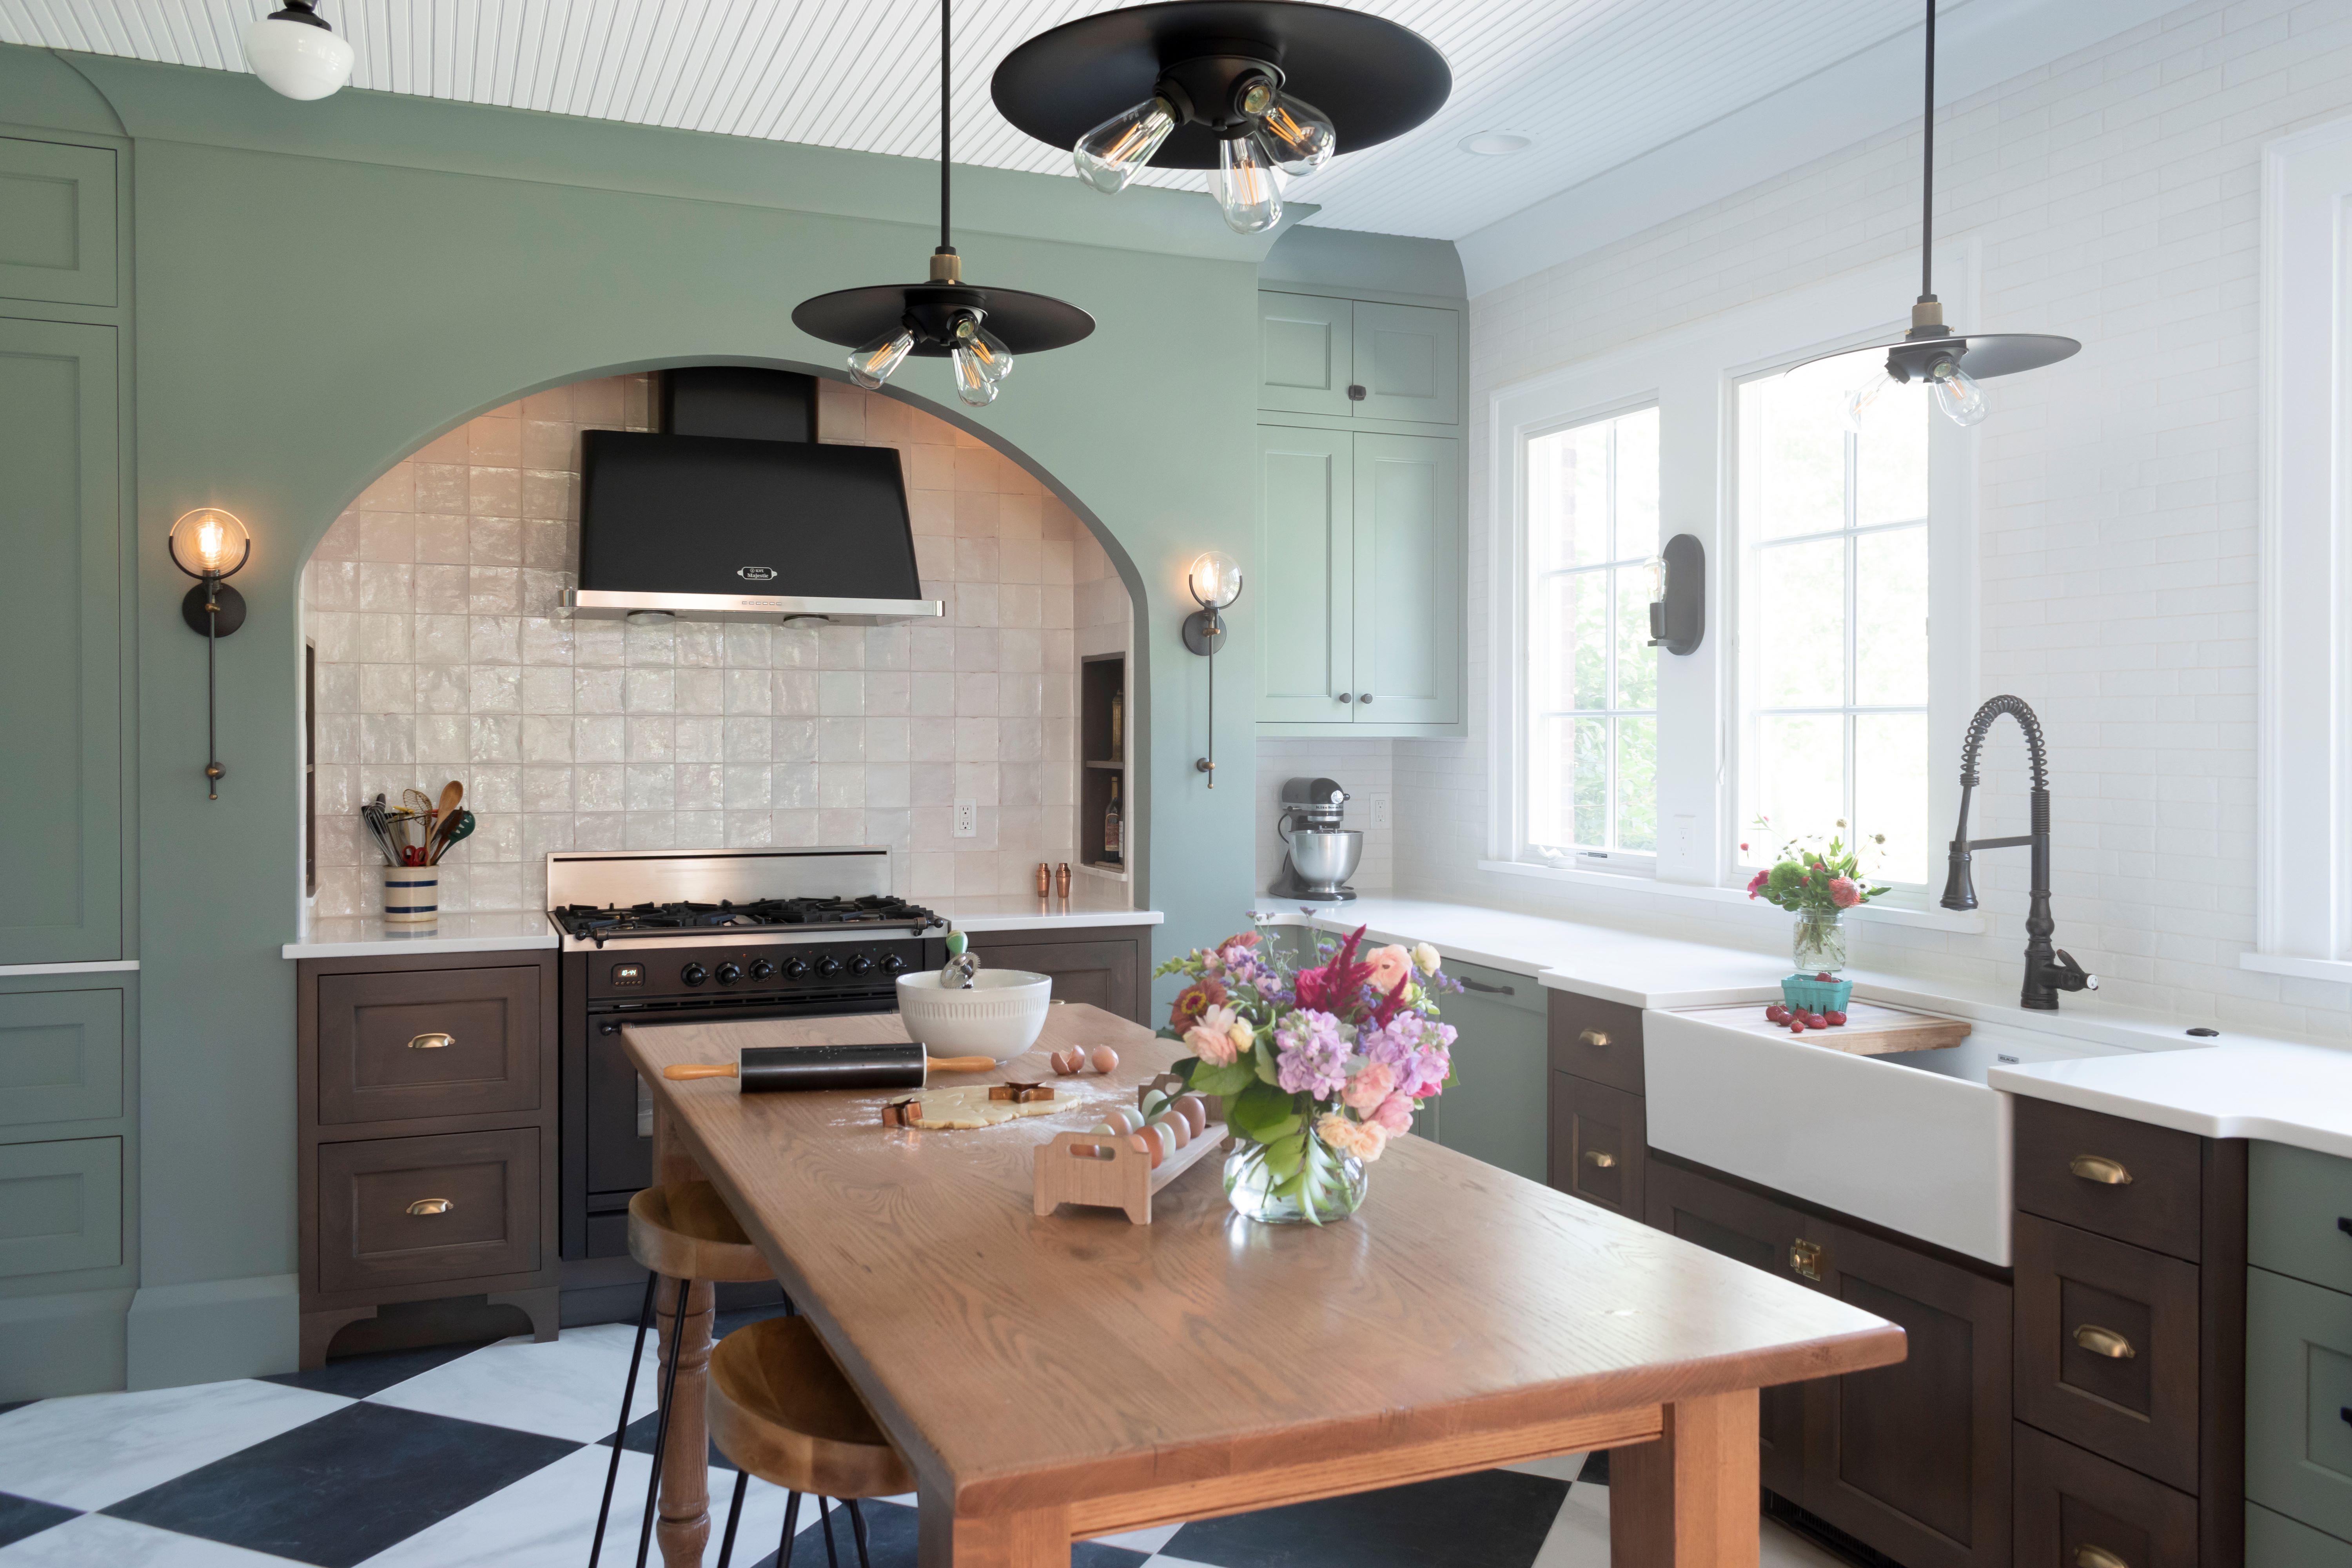 A 1920s Kitchen Renovation: Where Functionality Meets Social Space